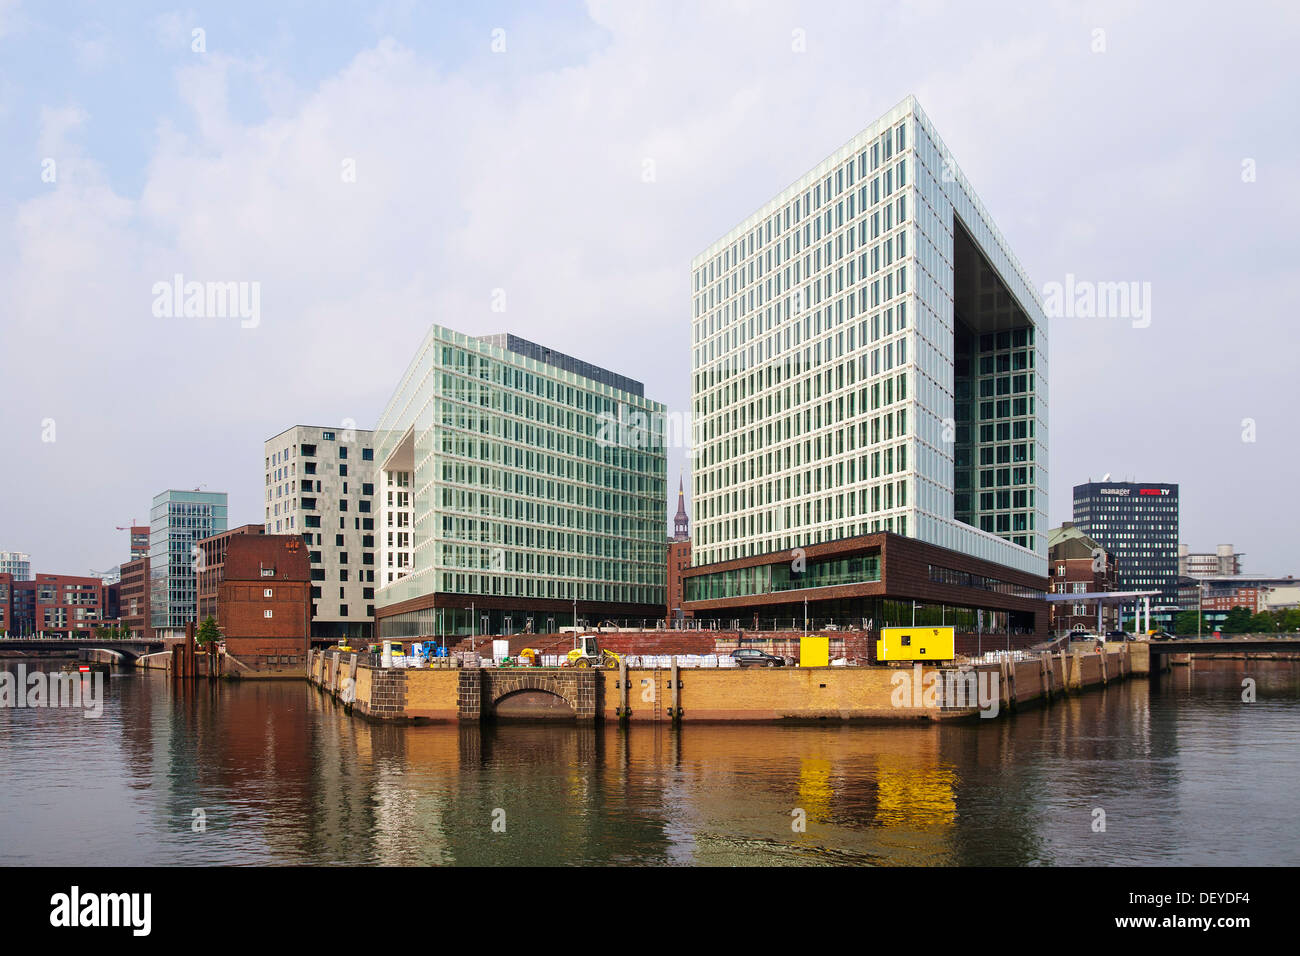 Building of the Spiegel publishing house and the Ericus-Contor building on Ericusspitze, Hafencity district, Hamburg Stock Photo